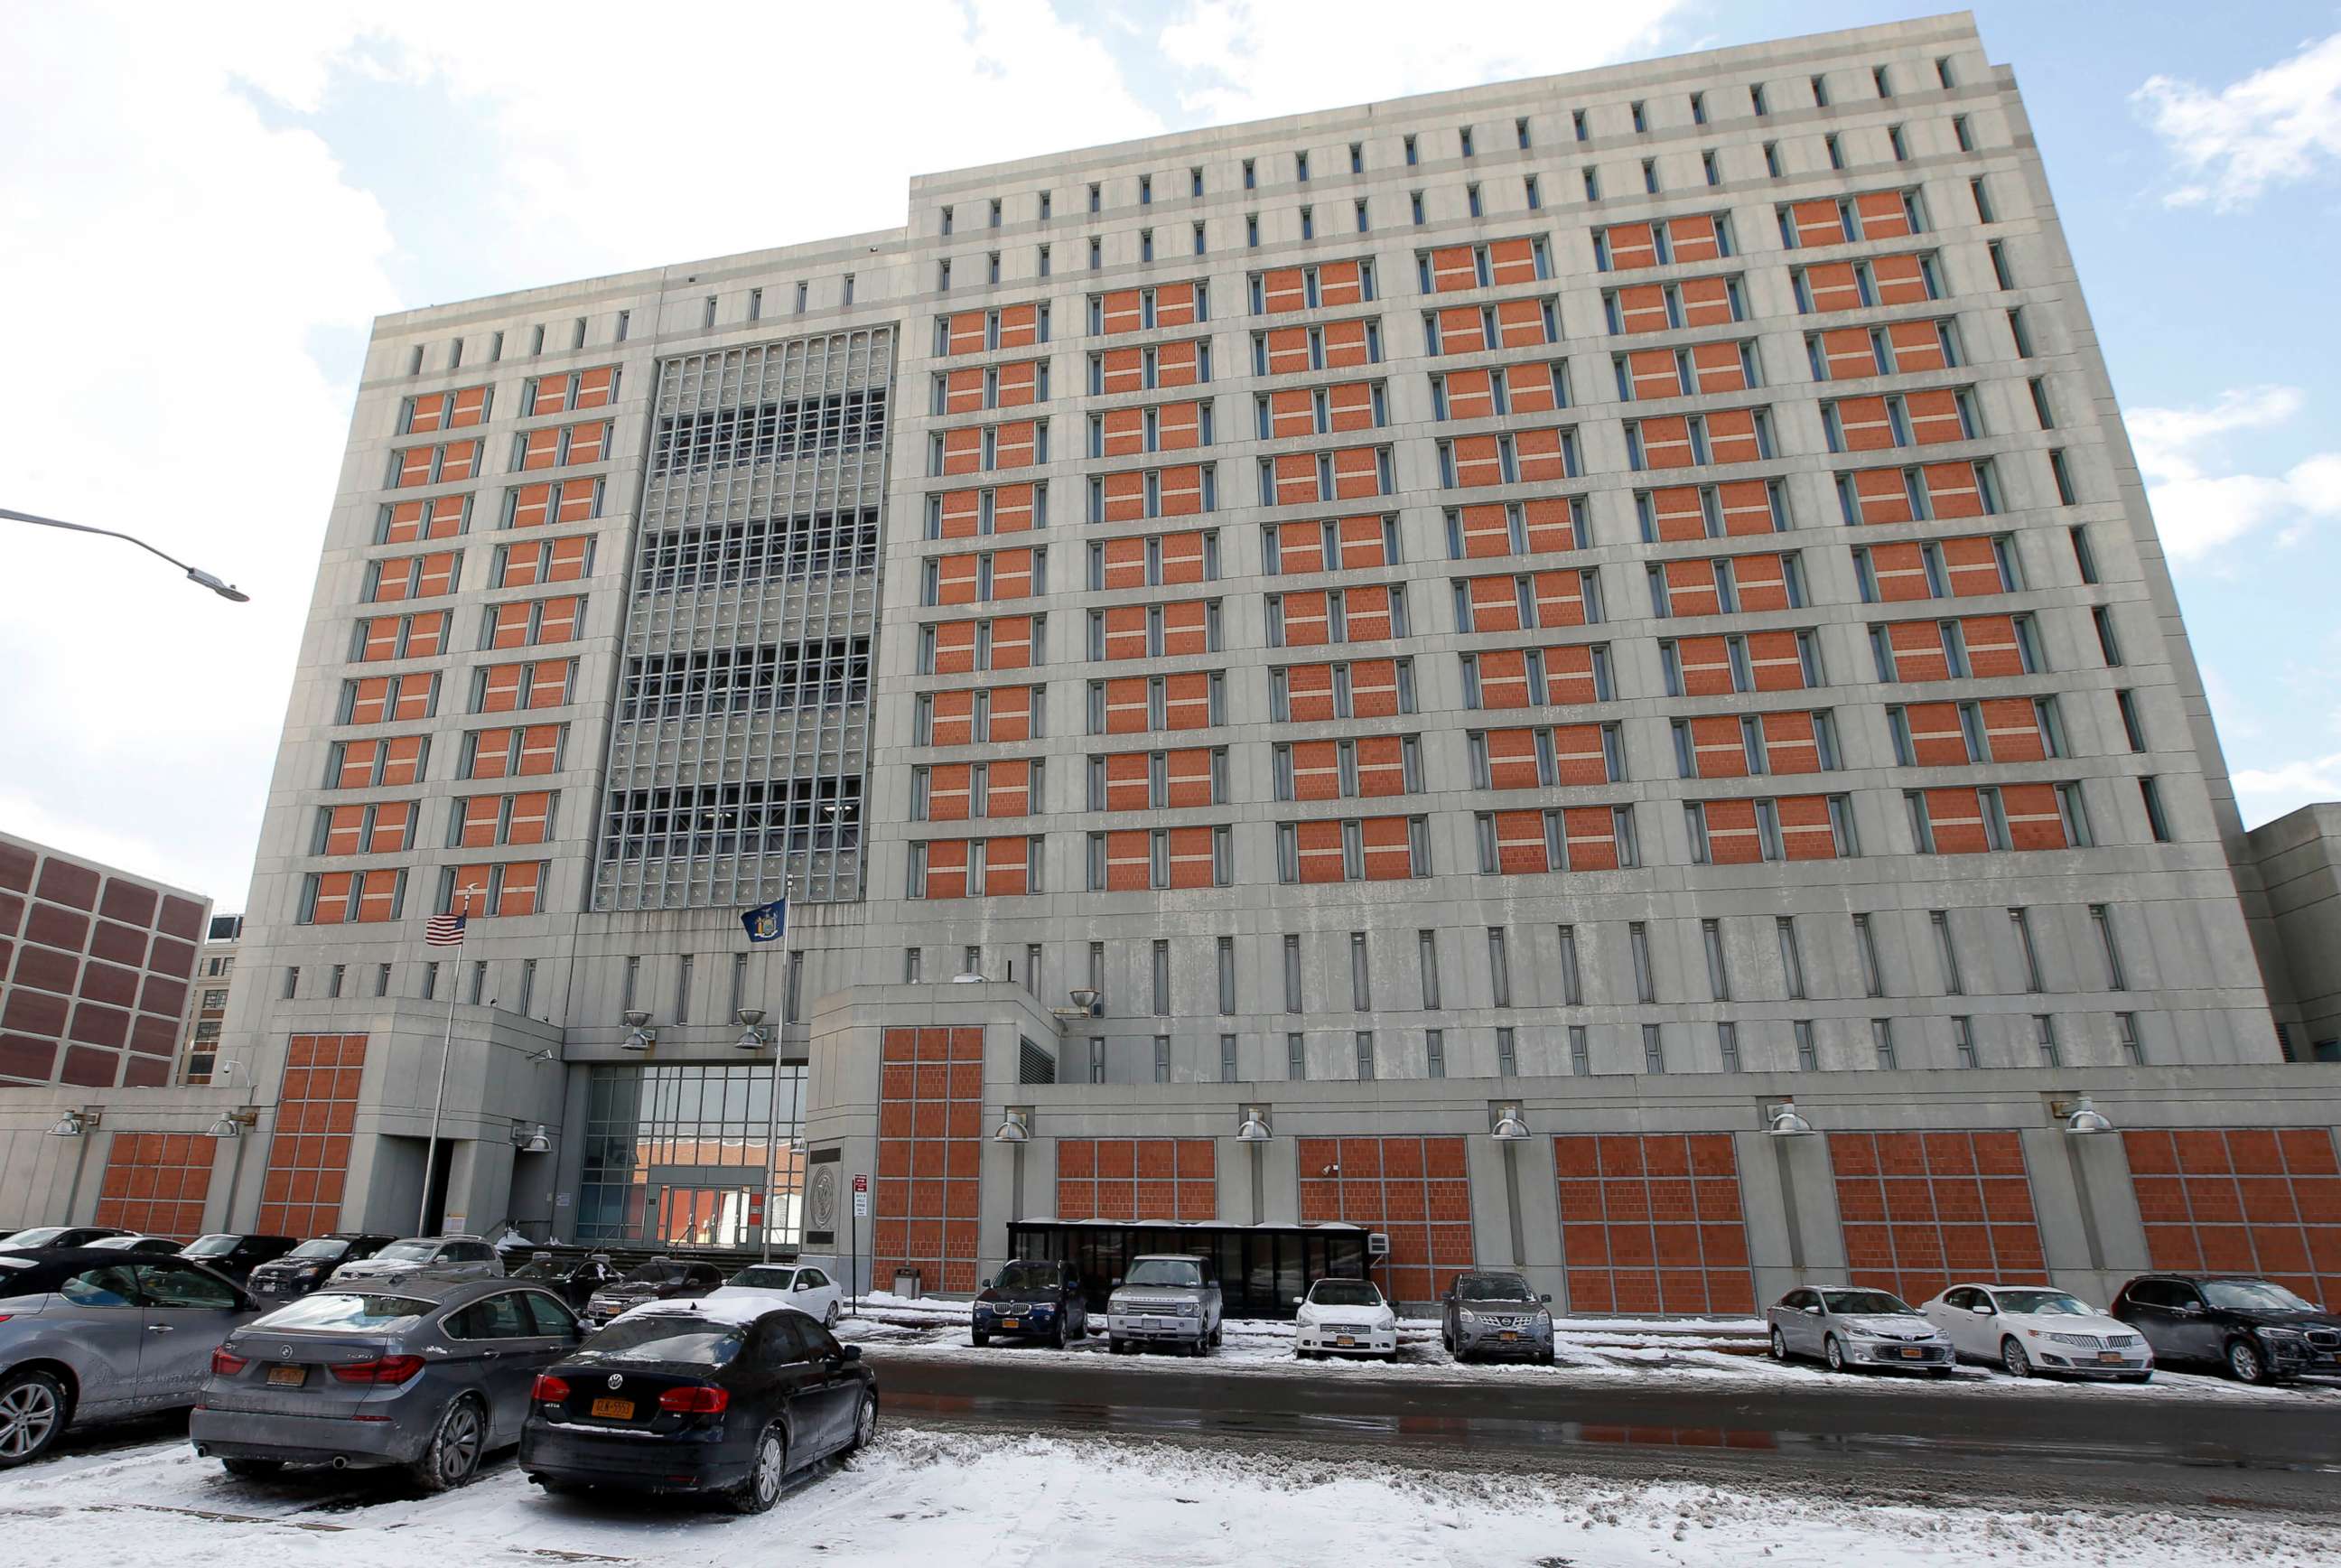 PHOTO: This Jan. 8, 2017 file photo shows the Metropolitan Detention Center in the Brooklyn borough of New York. An inmate at the jail died after being pepper sprayed by officers in his cell, the federal Bureau of Prisons said, Wednesday, June 3, 2020.